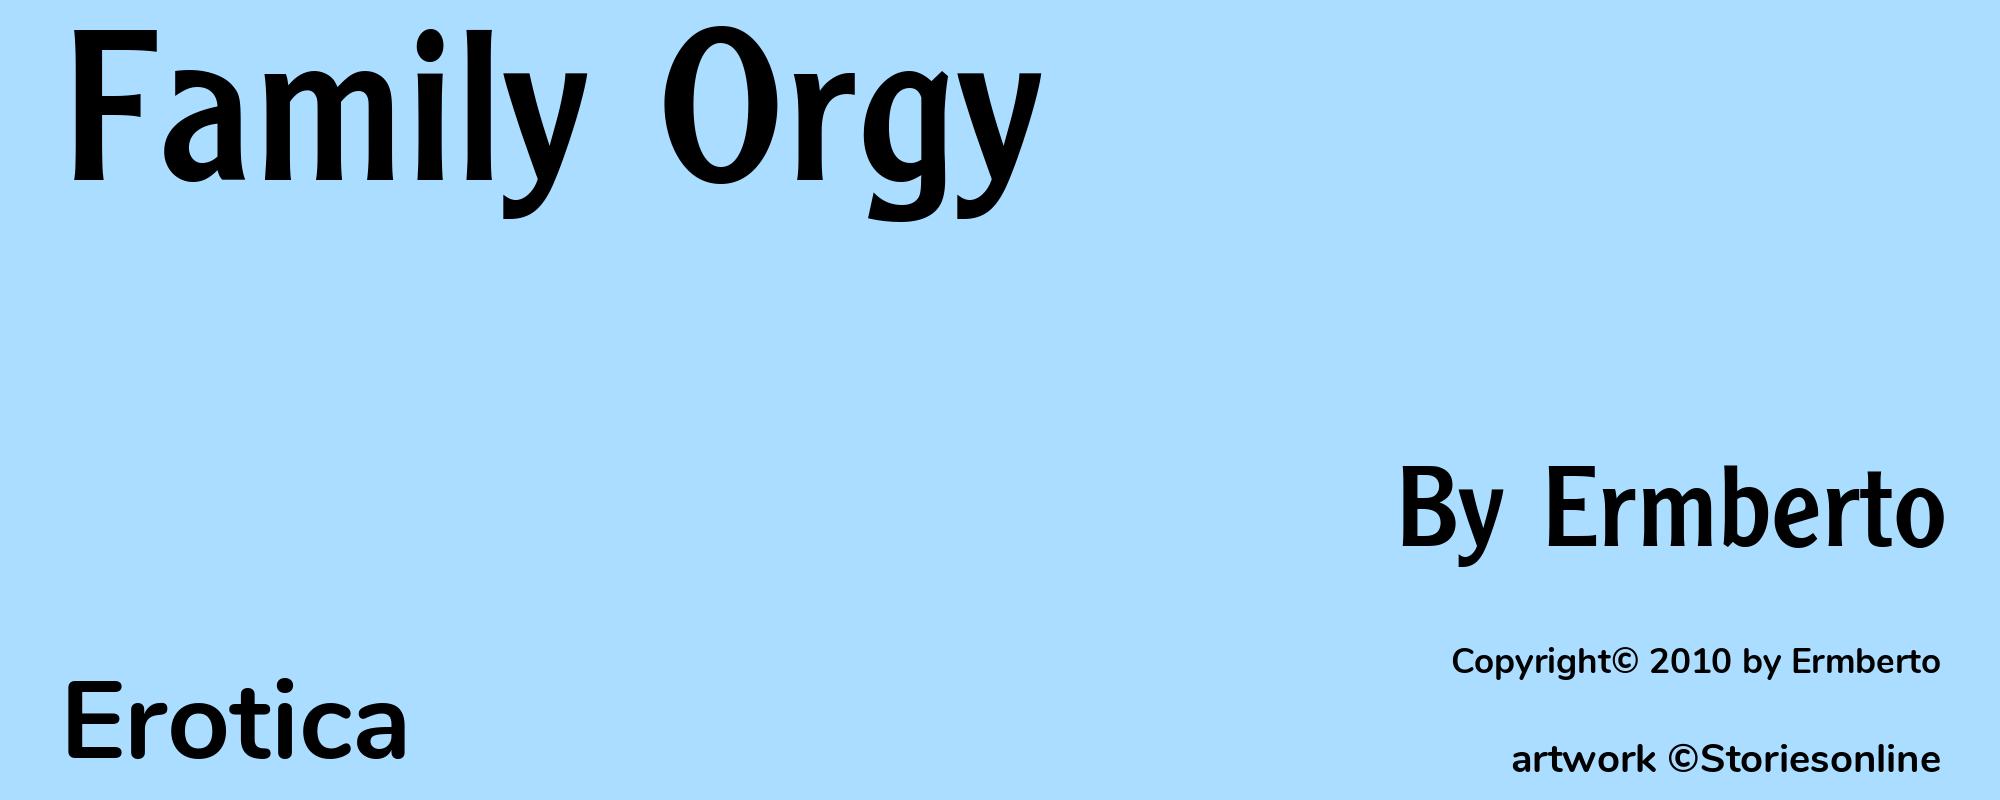 Family Orgy - Cover